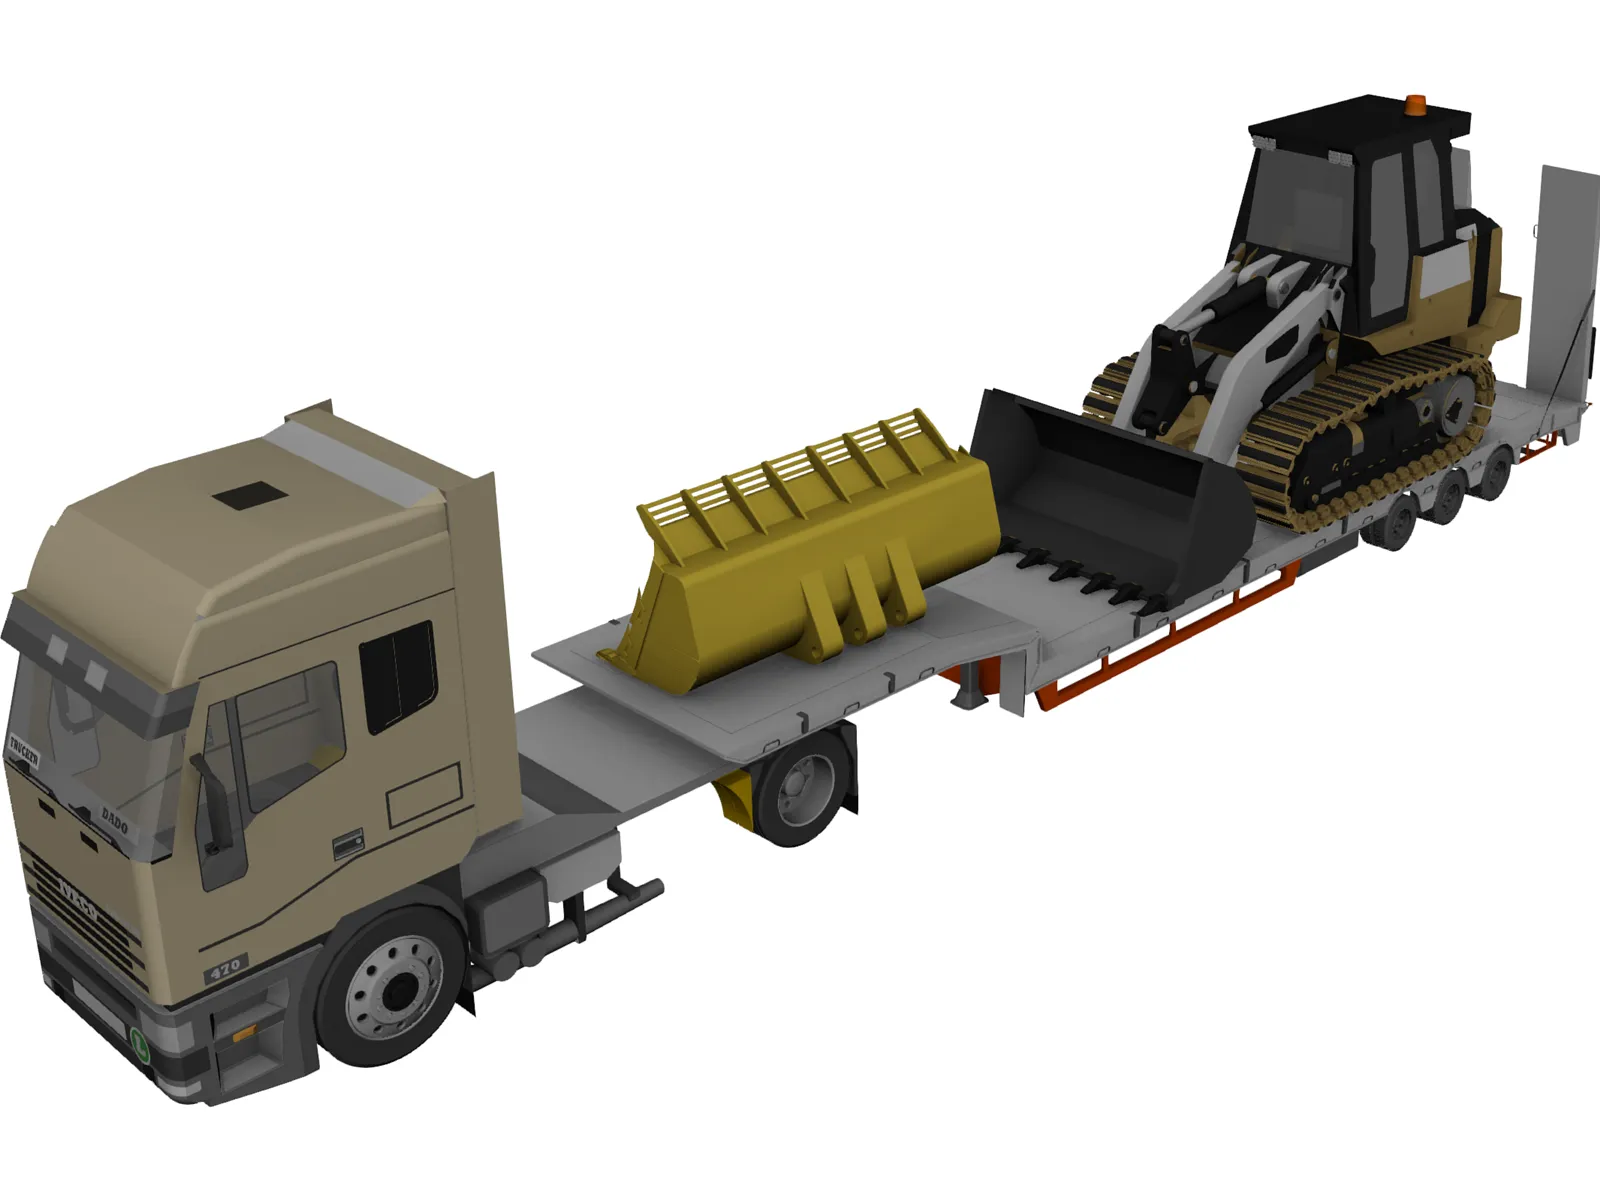 Iveco Tractor with Excavator on Flat Bed 3D Model